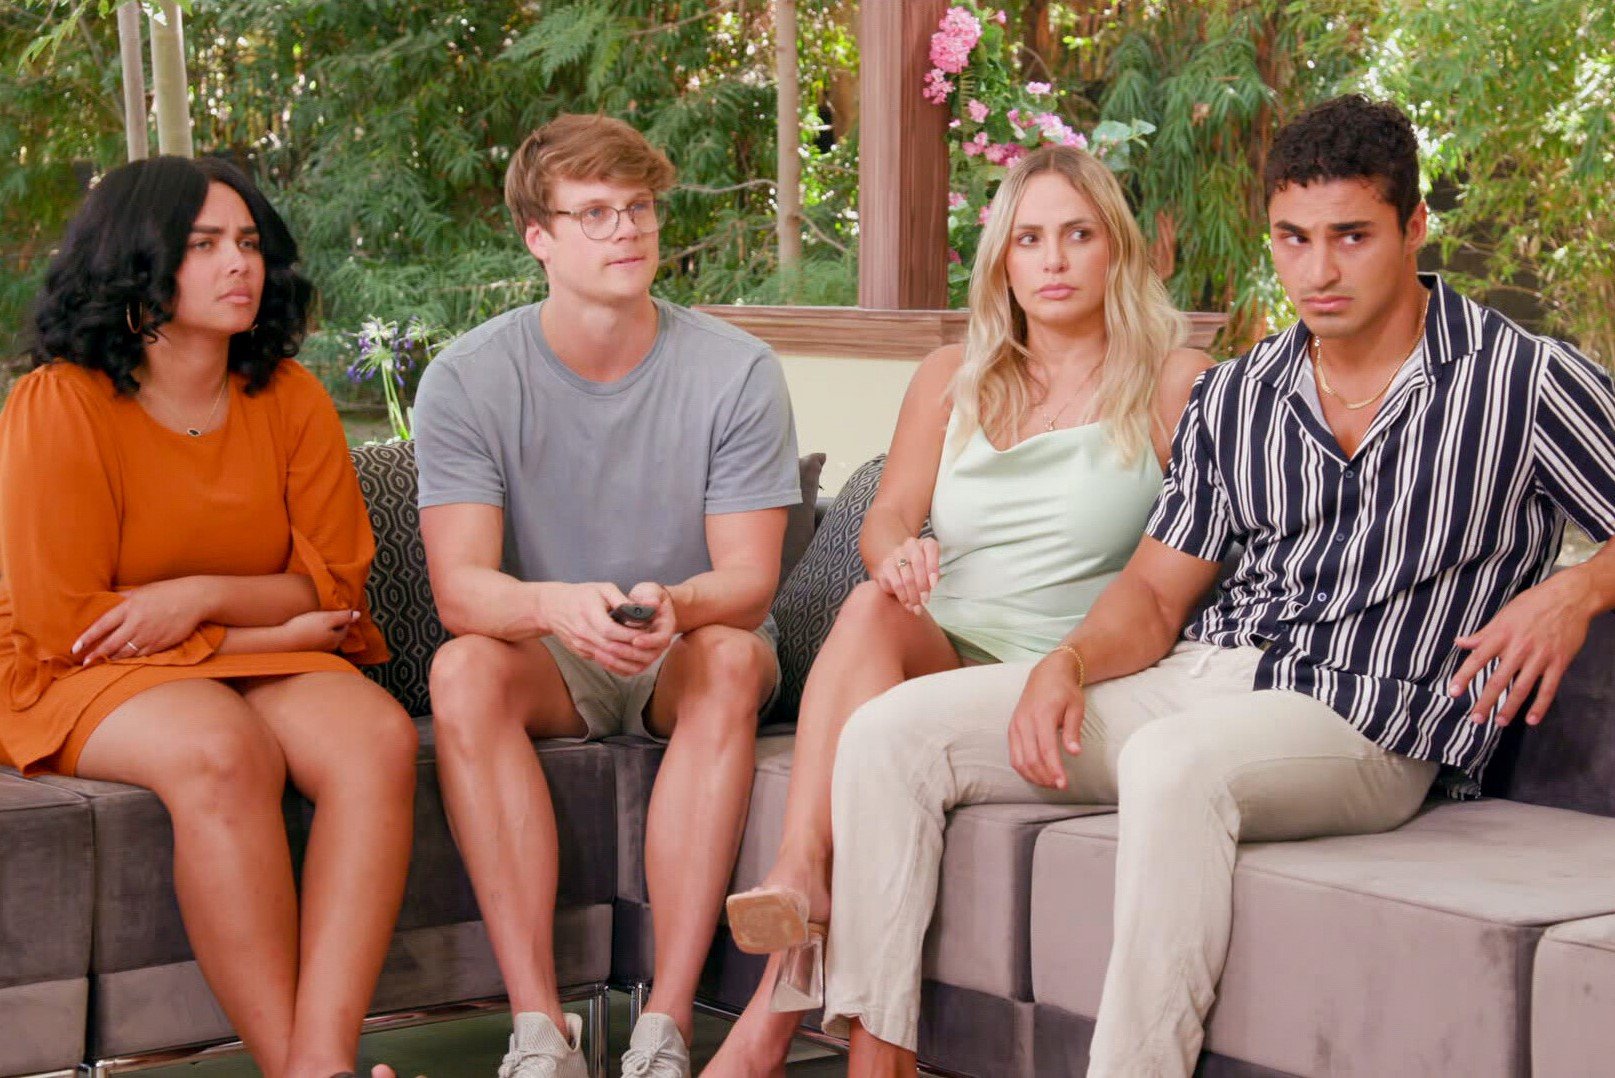 Jasmine Davis, Kyle Capener, Indy Santos, and Joseph Abdin, who are a part of the 'Big Brother 24' jury, sit on a couch. Jasmine wears an orange dress. Kyle wears a gray shirt and tan shorts. Indy wears a light green dress. Joseph wears a black and white striped shirt and tan pants.